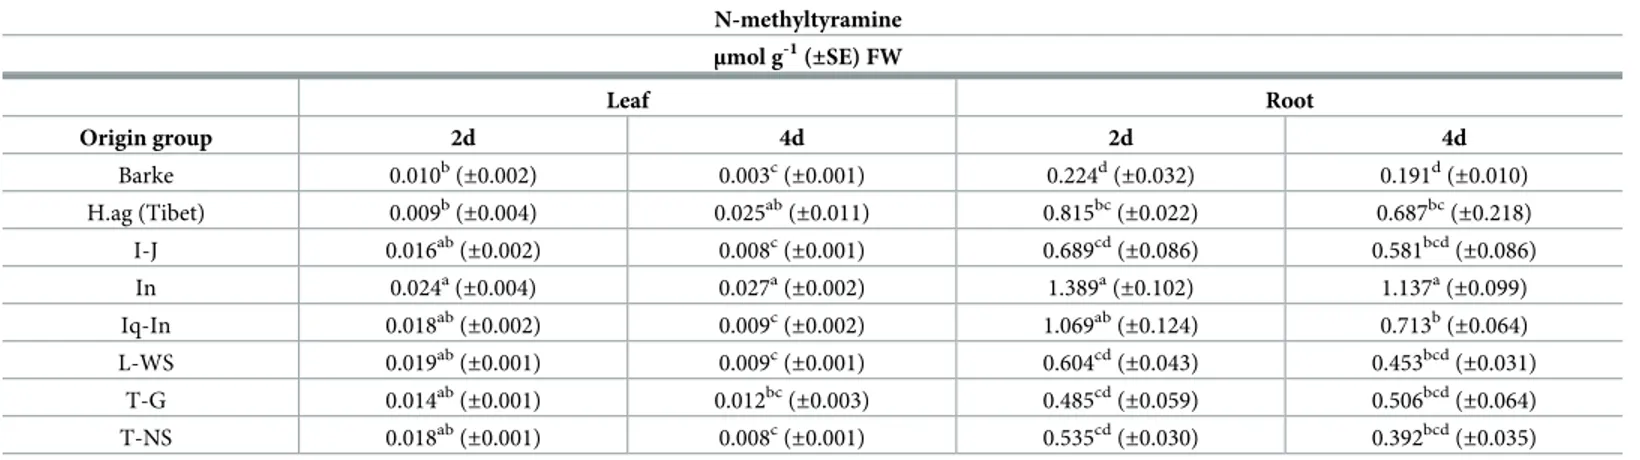 Table 2. N-methyltyramine content measured in the leaf and root extracts of 2 and 4 days old barley plants.